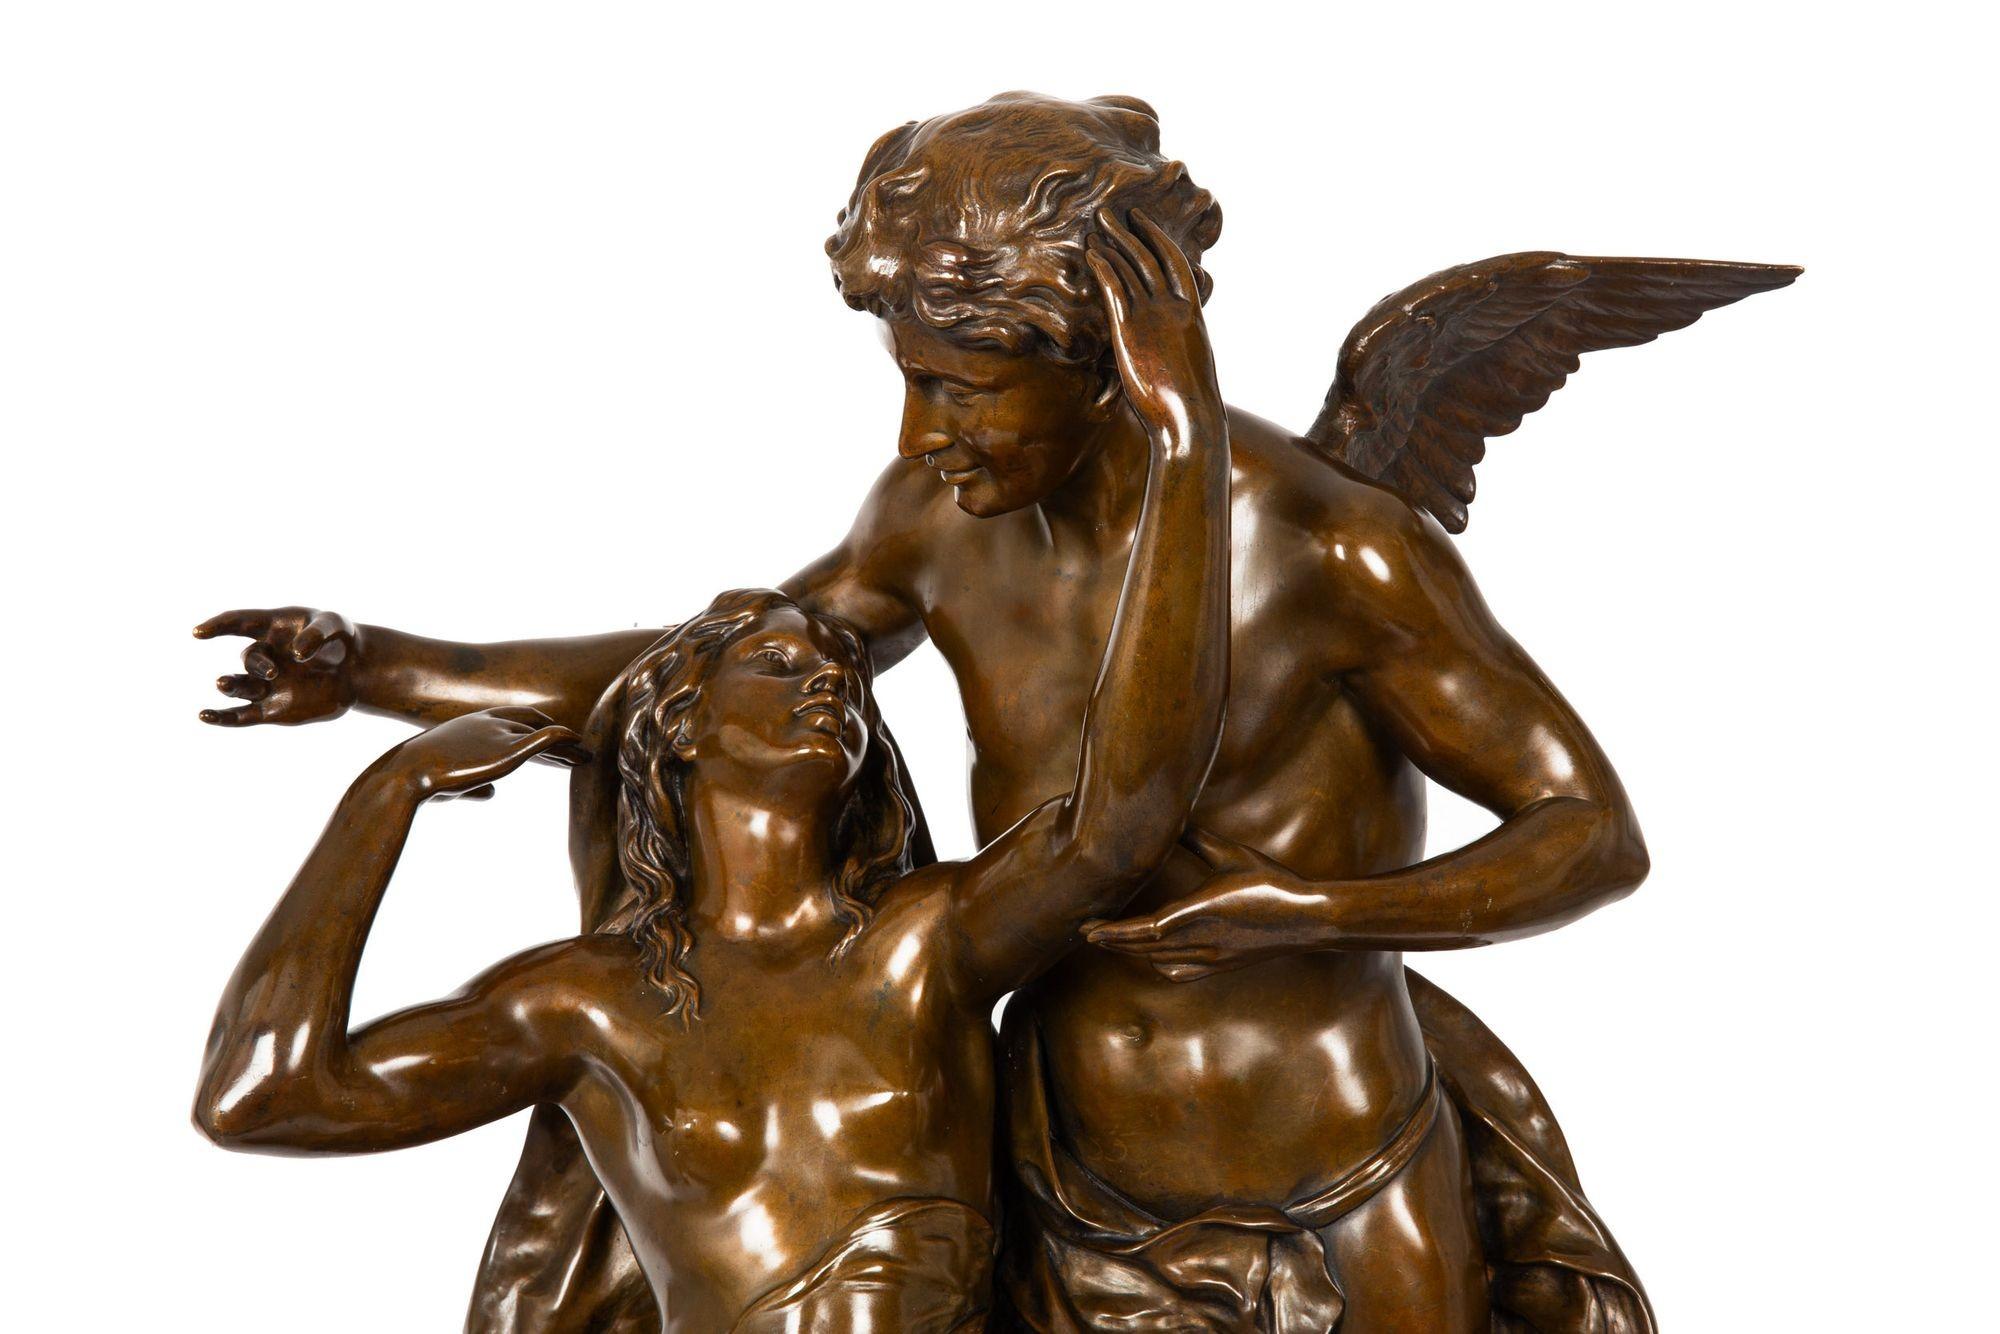 19th Century French Antique Bronze Sculpture “Awakening of Nature” by Emile Picault For Sale